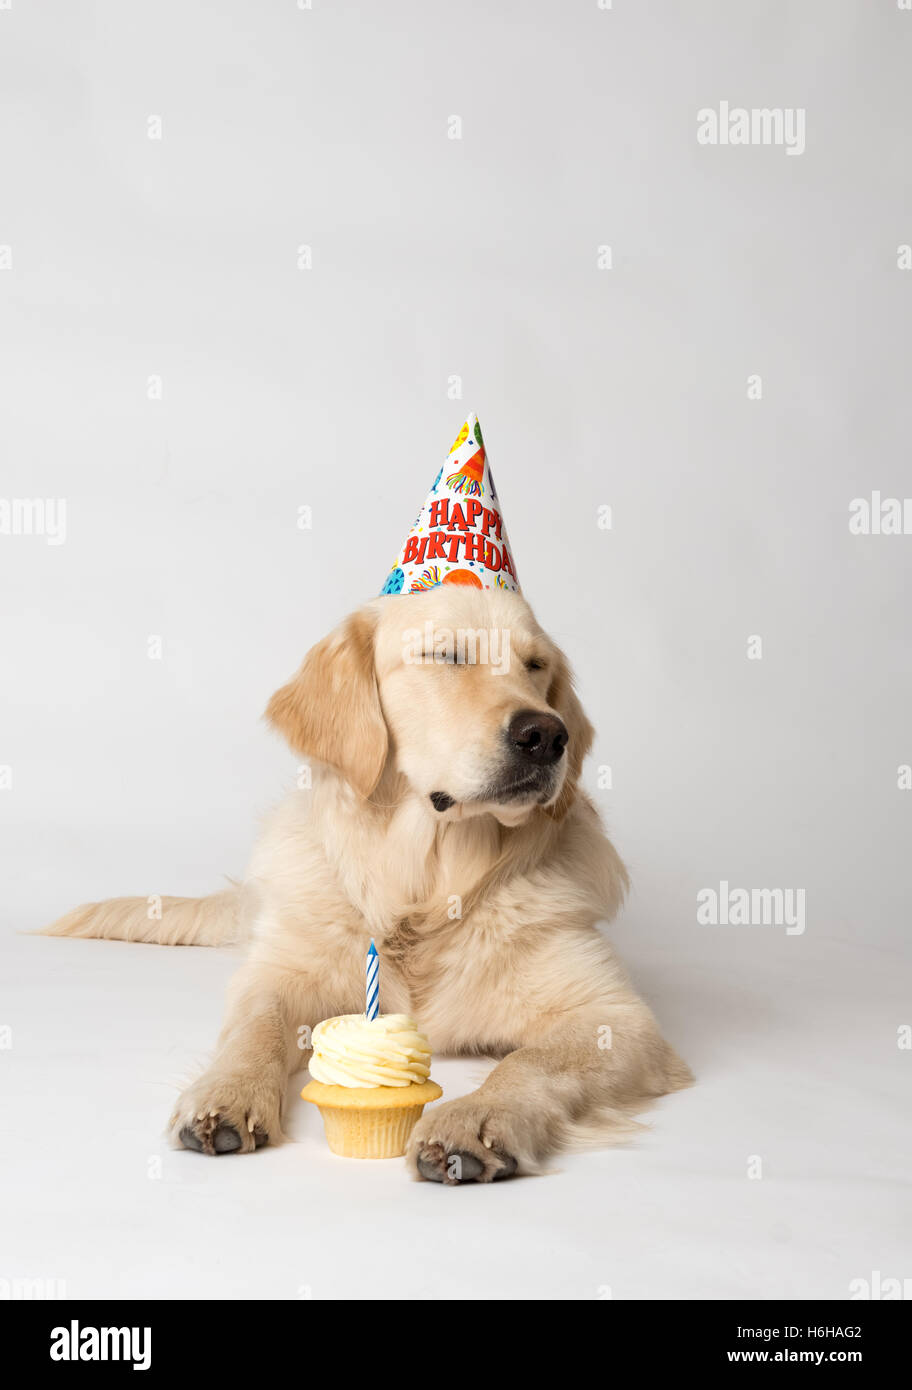 Birthday dog with party hat and cupcake seems unimpressed by his Stock Photo: 124541986 - Alamy